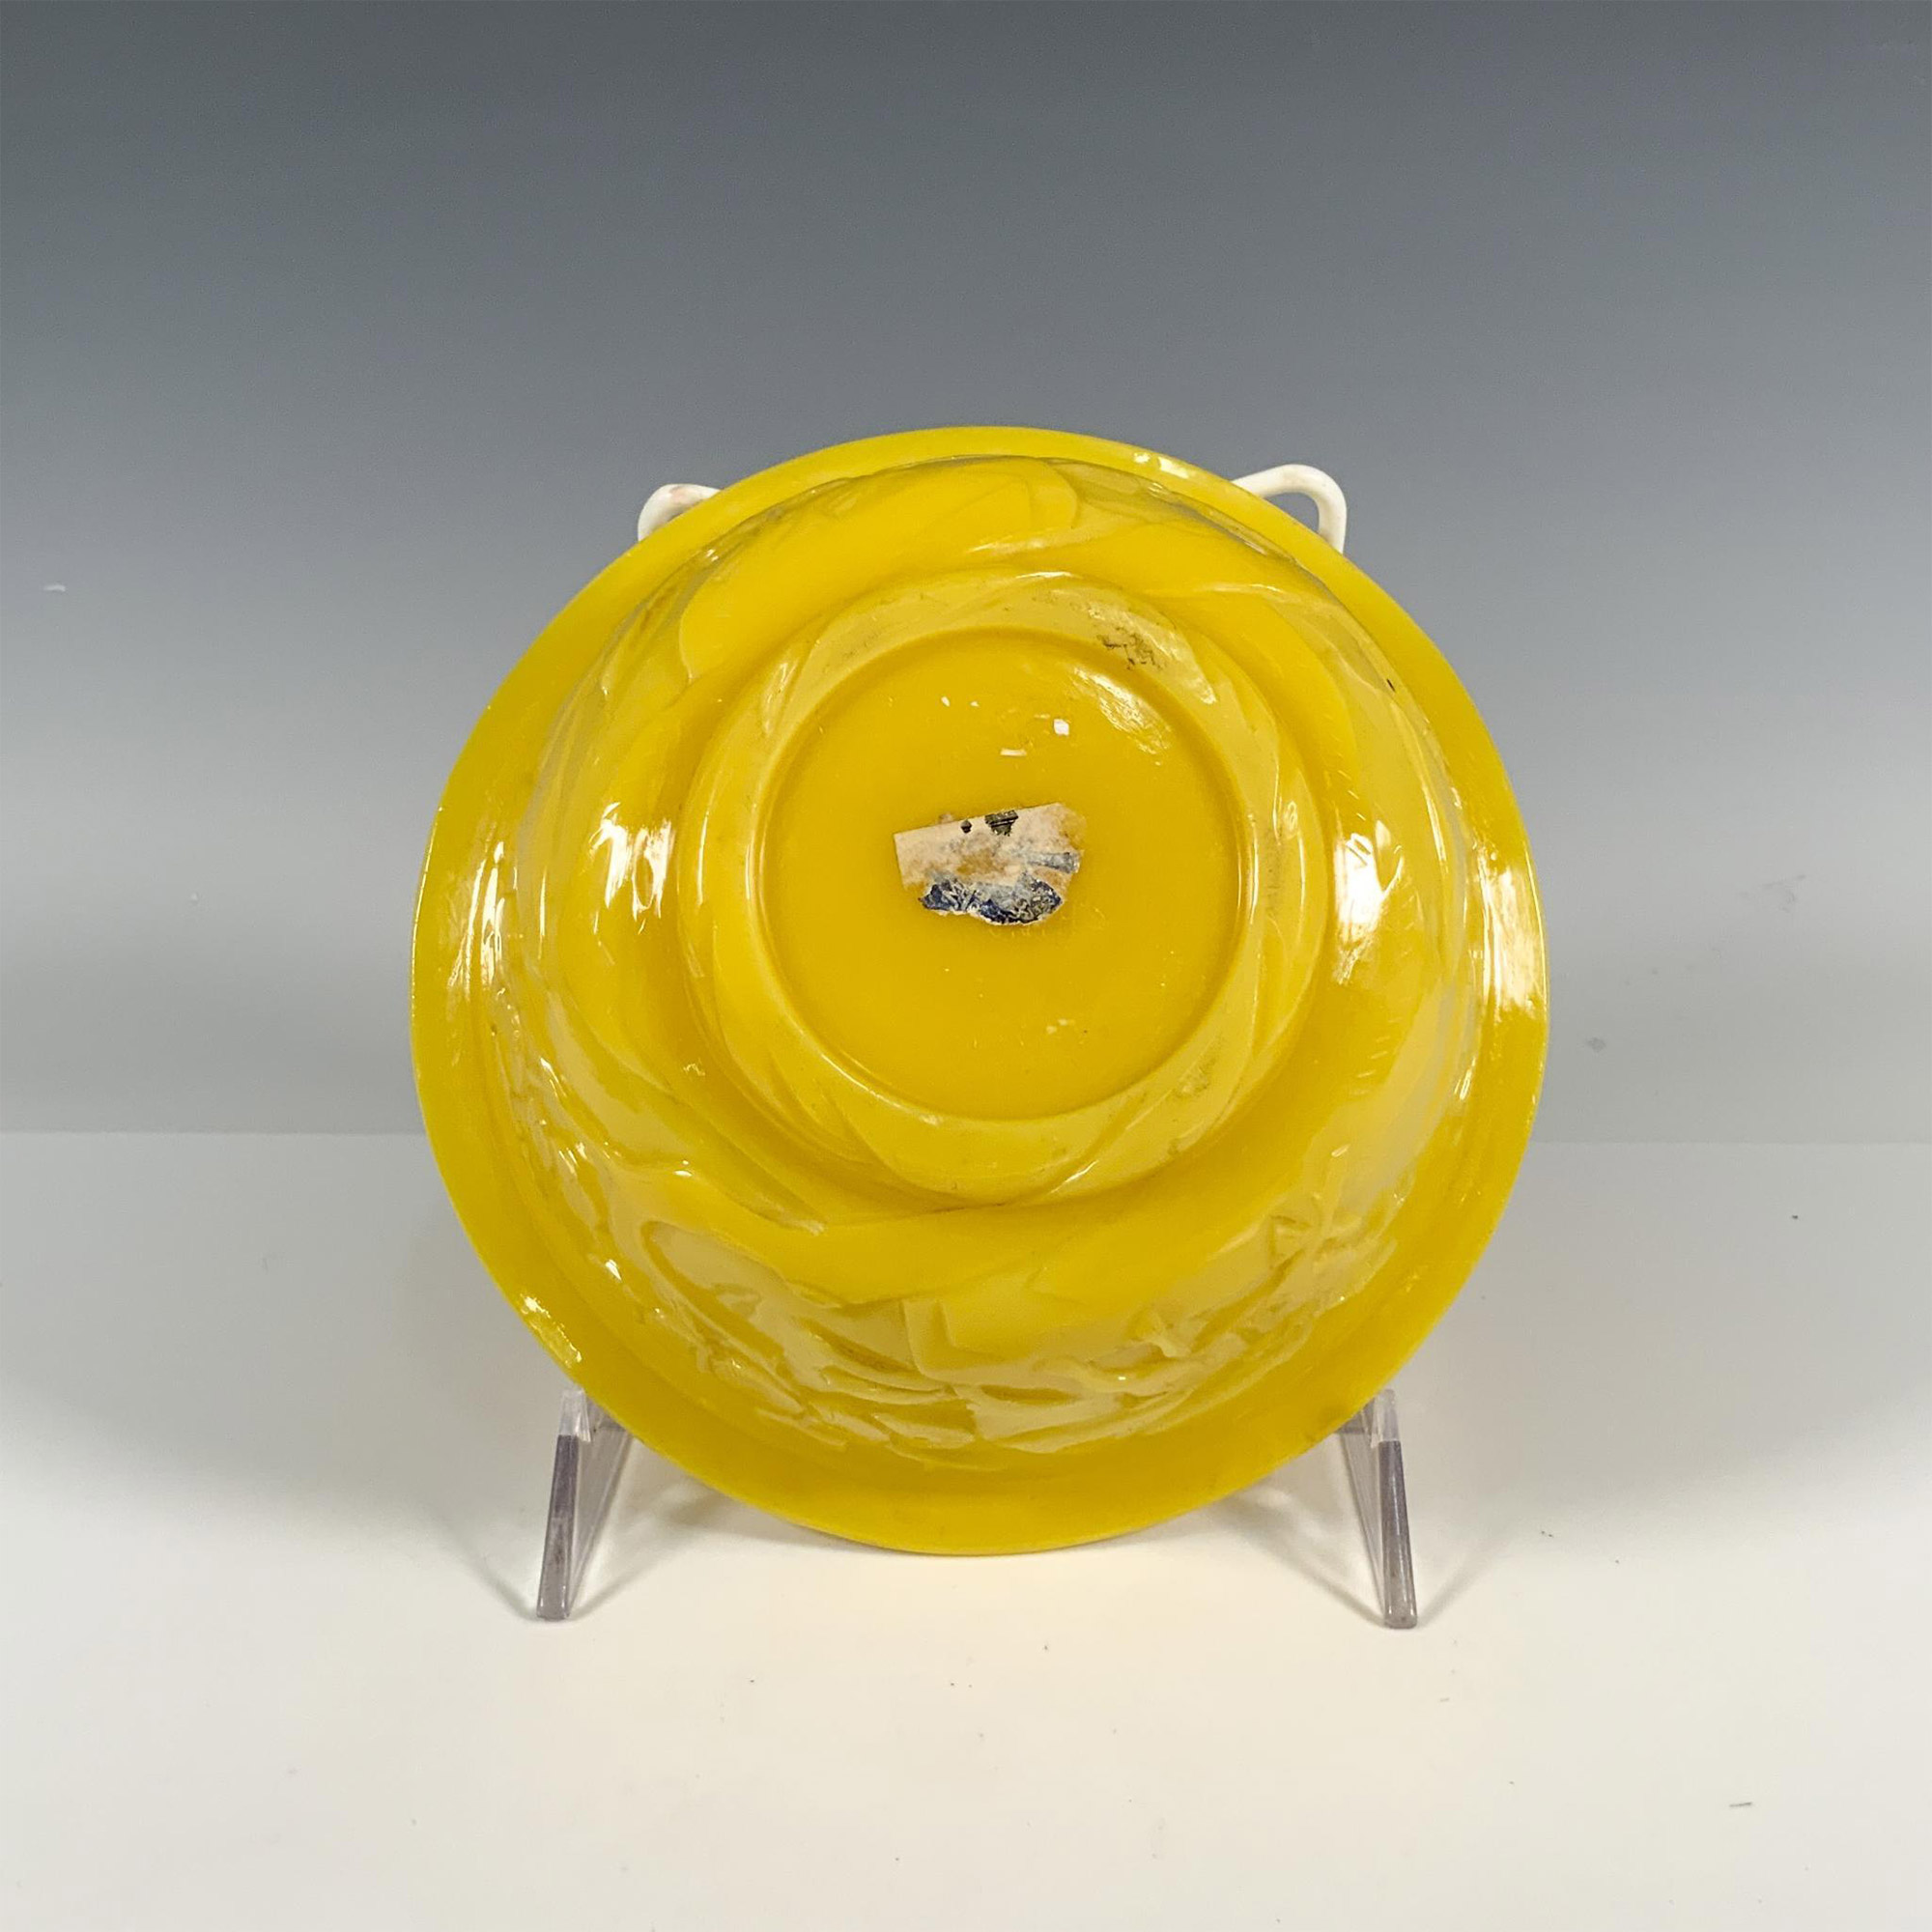 19th Century Chinese Imperial Peking Glass Bowl - Image 3 of 3